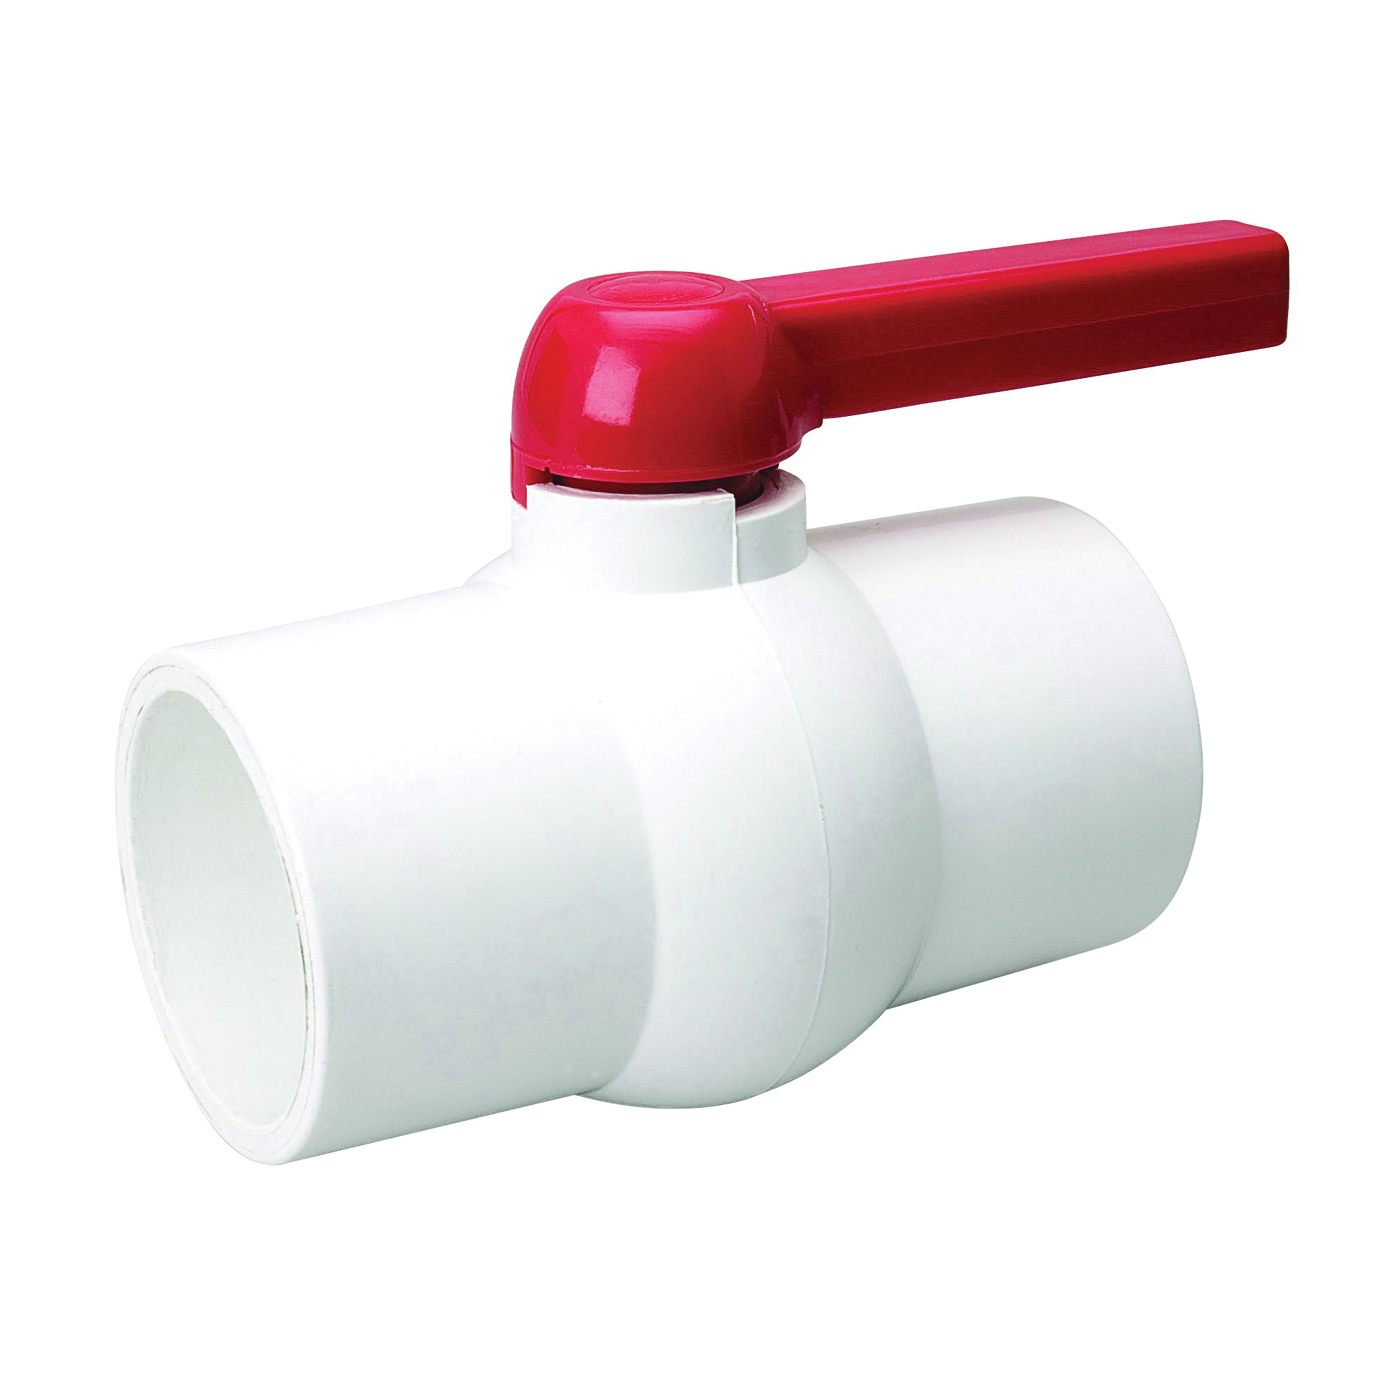 107-641 Ball Valve, 4 in Connection, Compression, 150 psi Pressure, Manual Actuator, PVC Body